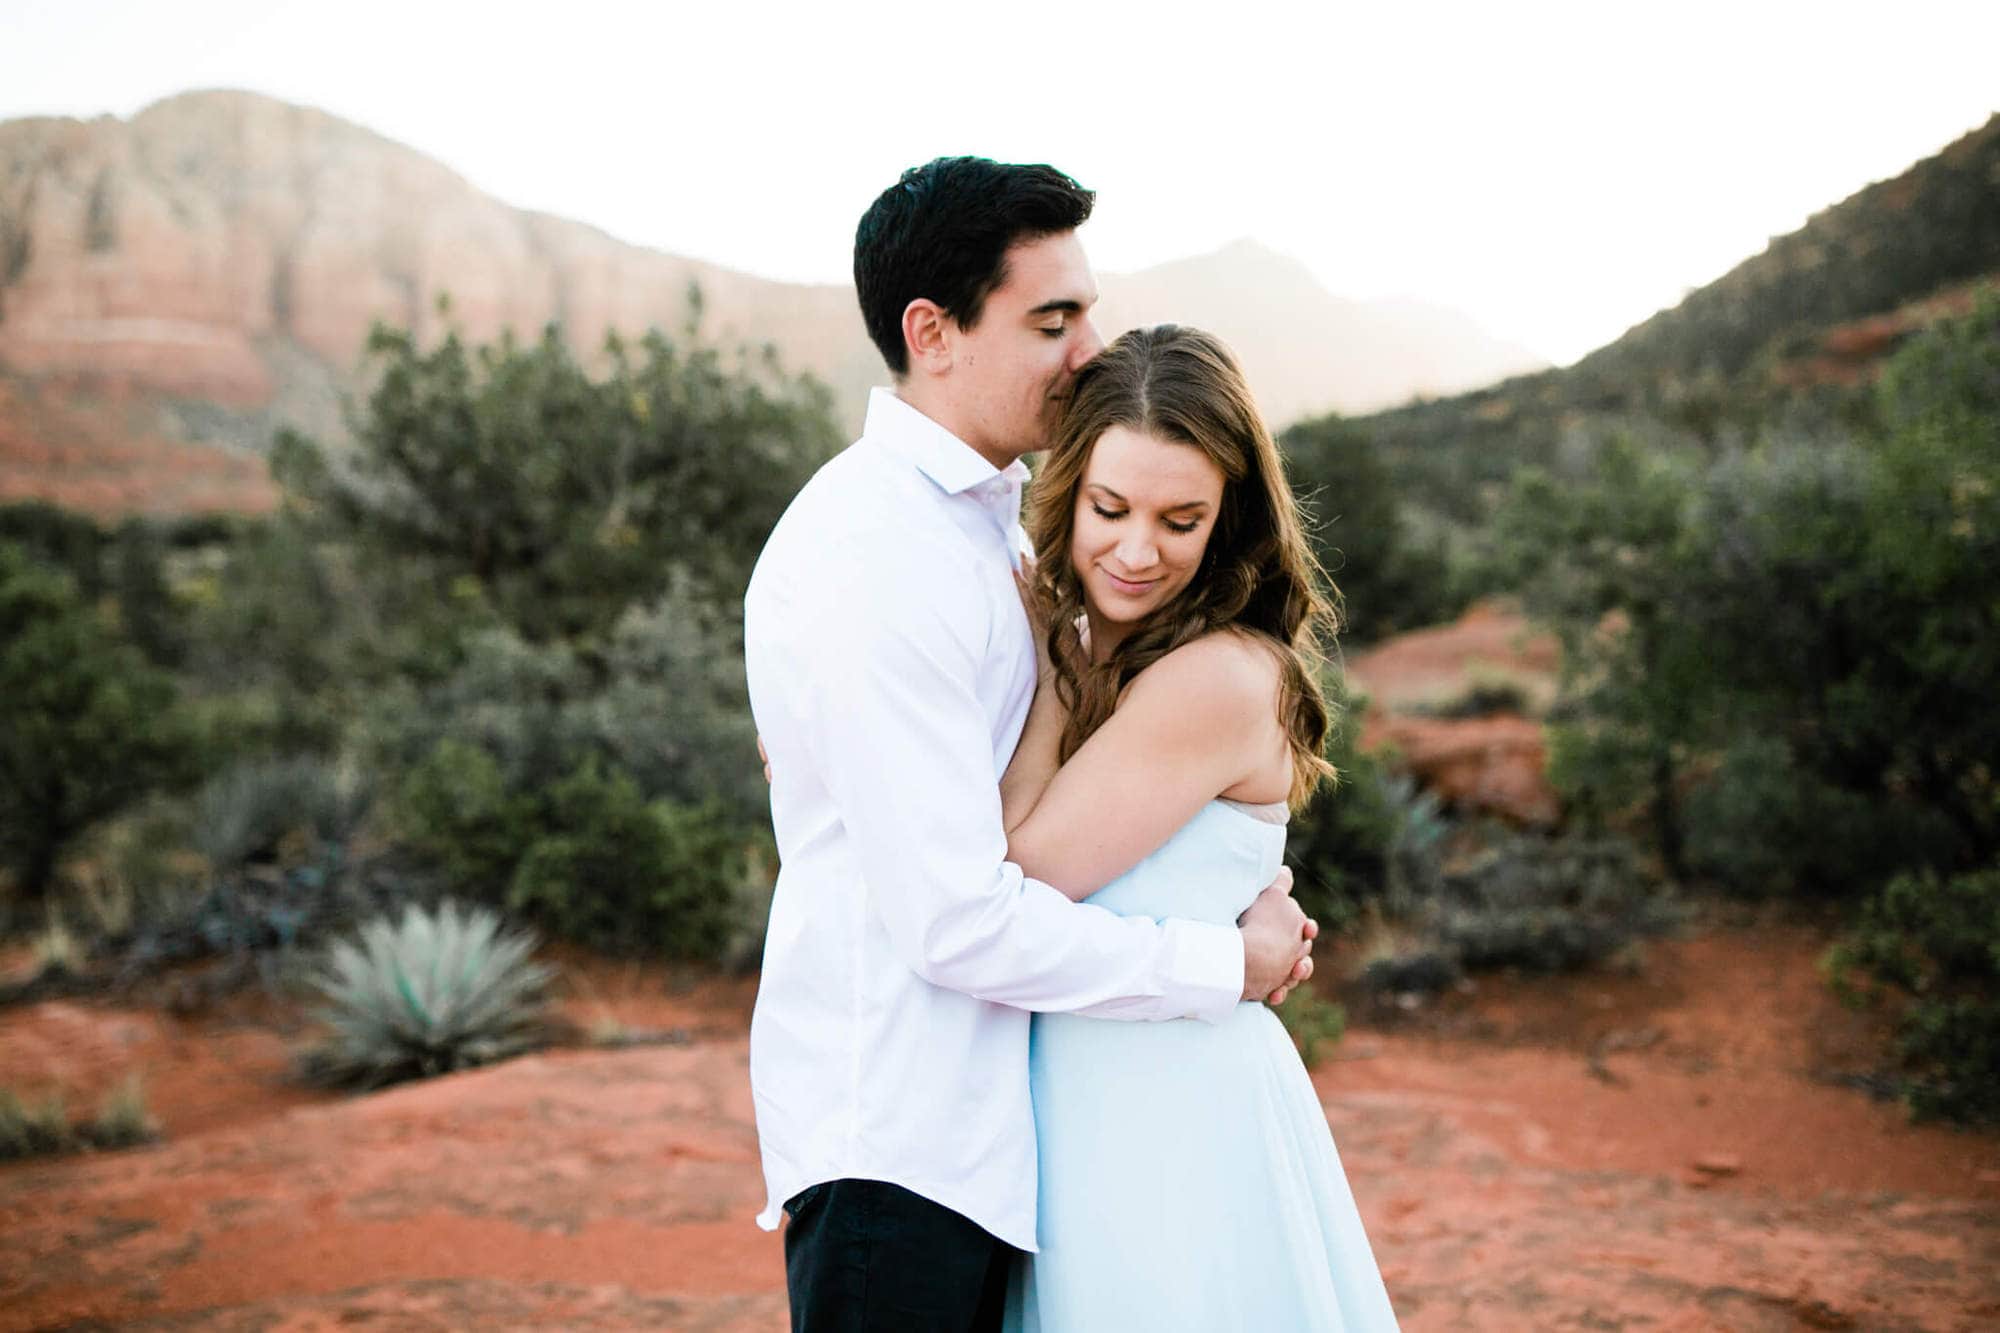 The groom kisses his bride's head during their epic sedona elopement.